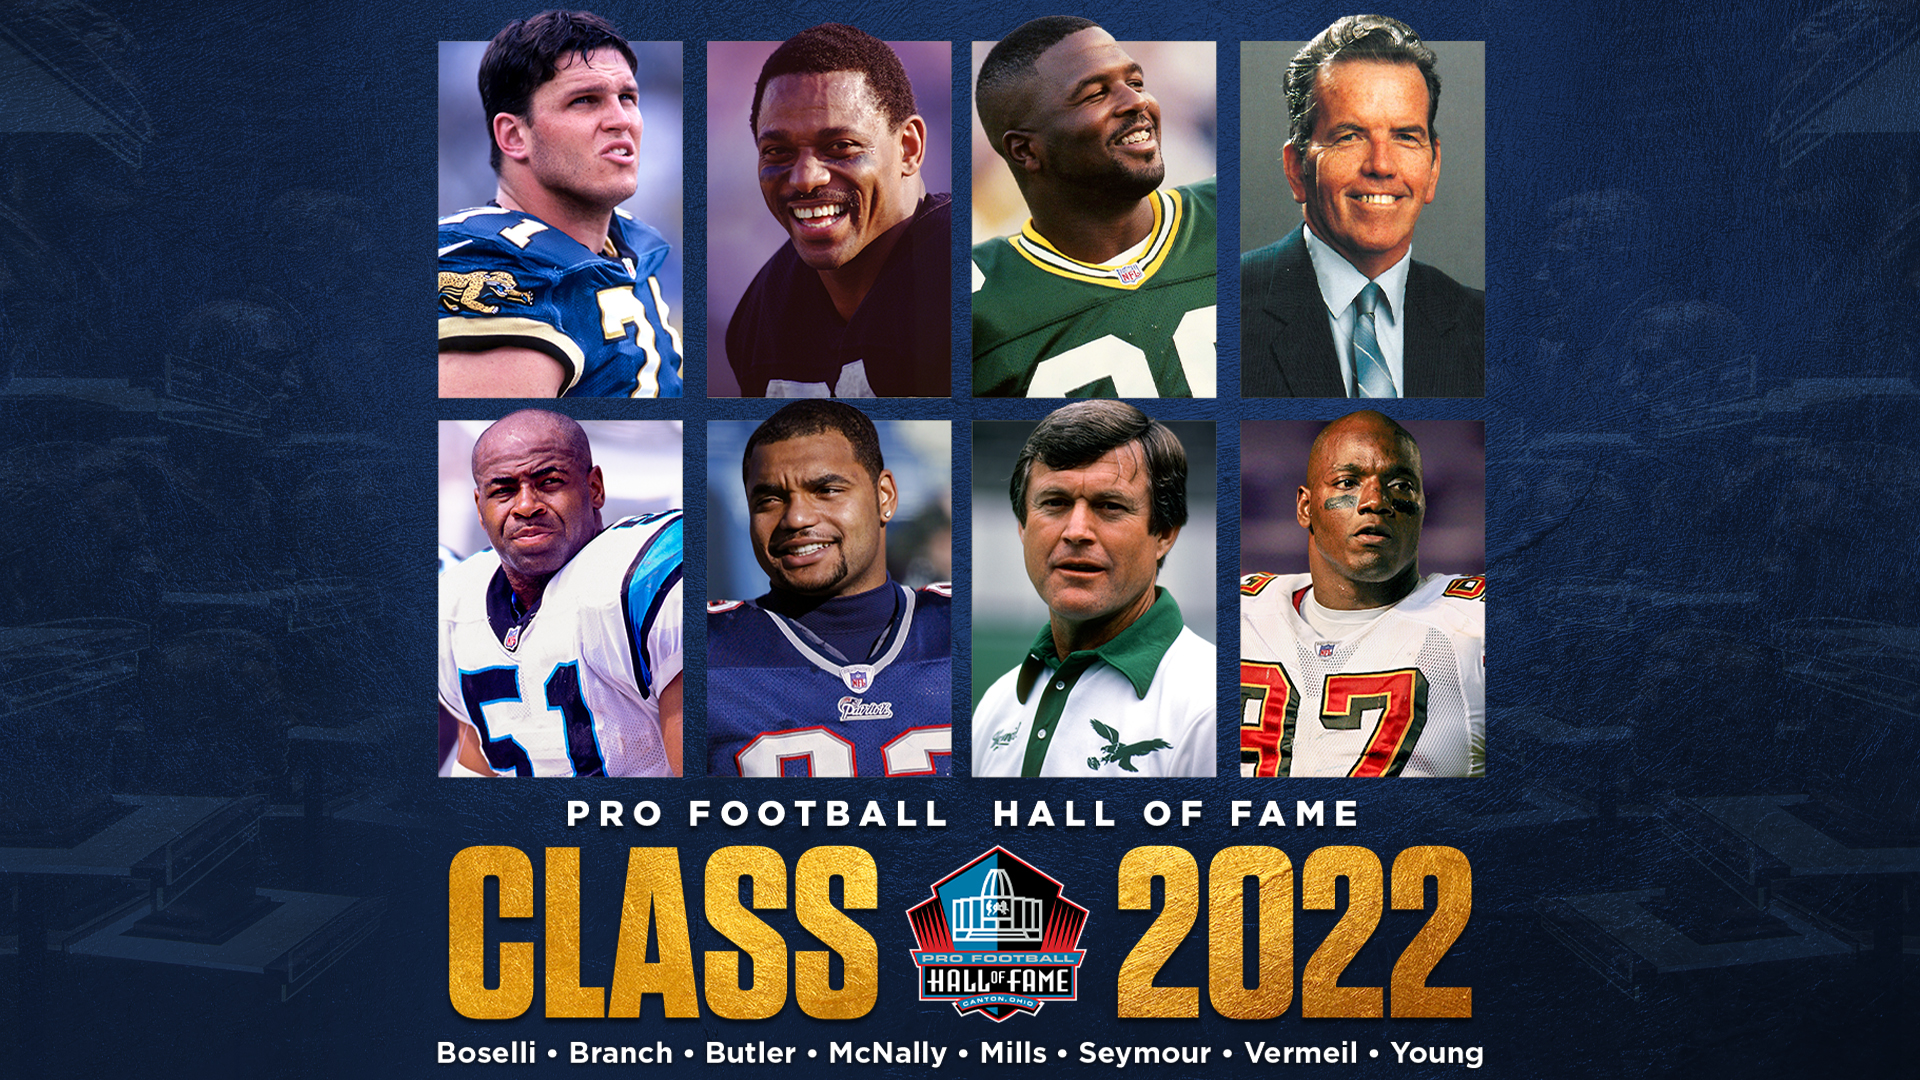 Class of 2022 | Pro Football Hall of Fame Official Site